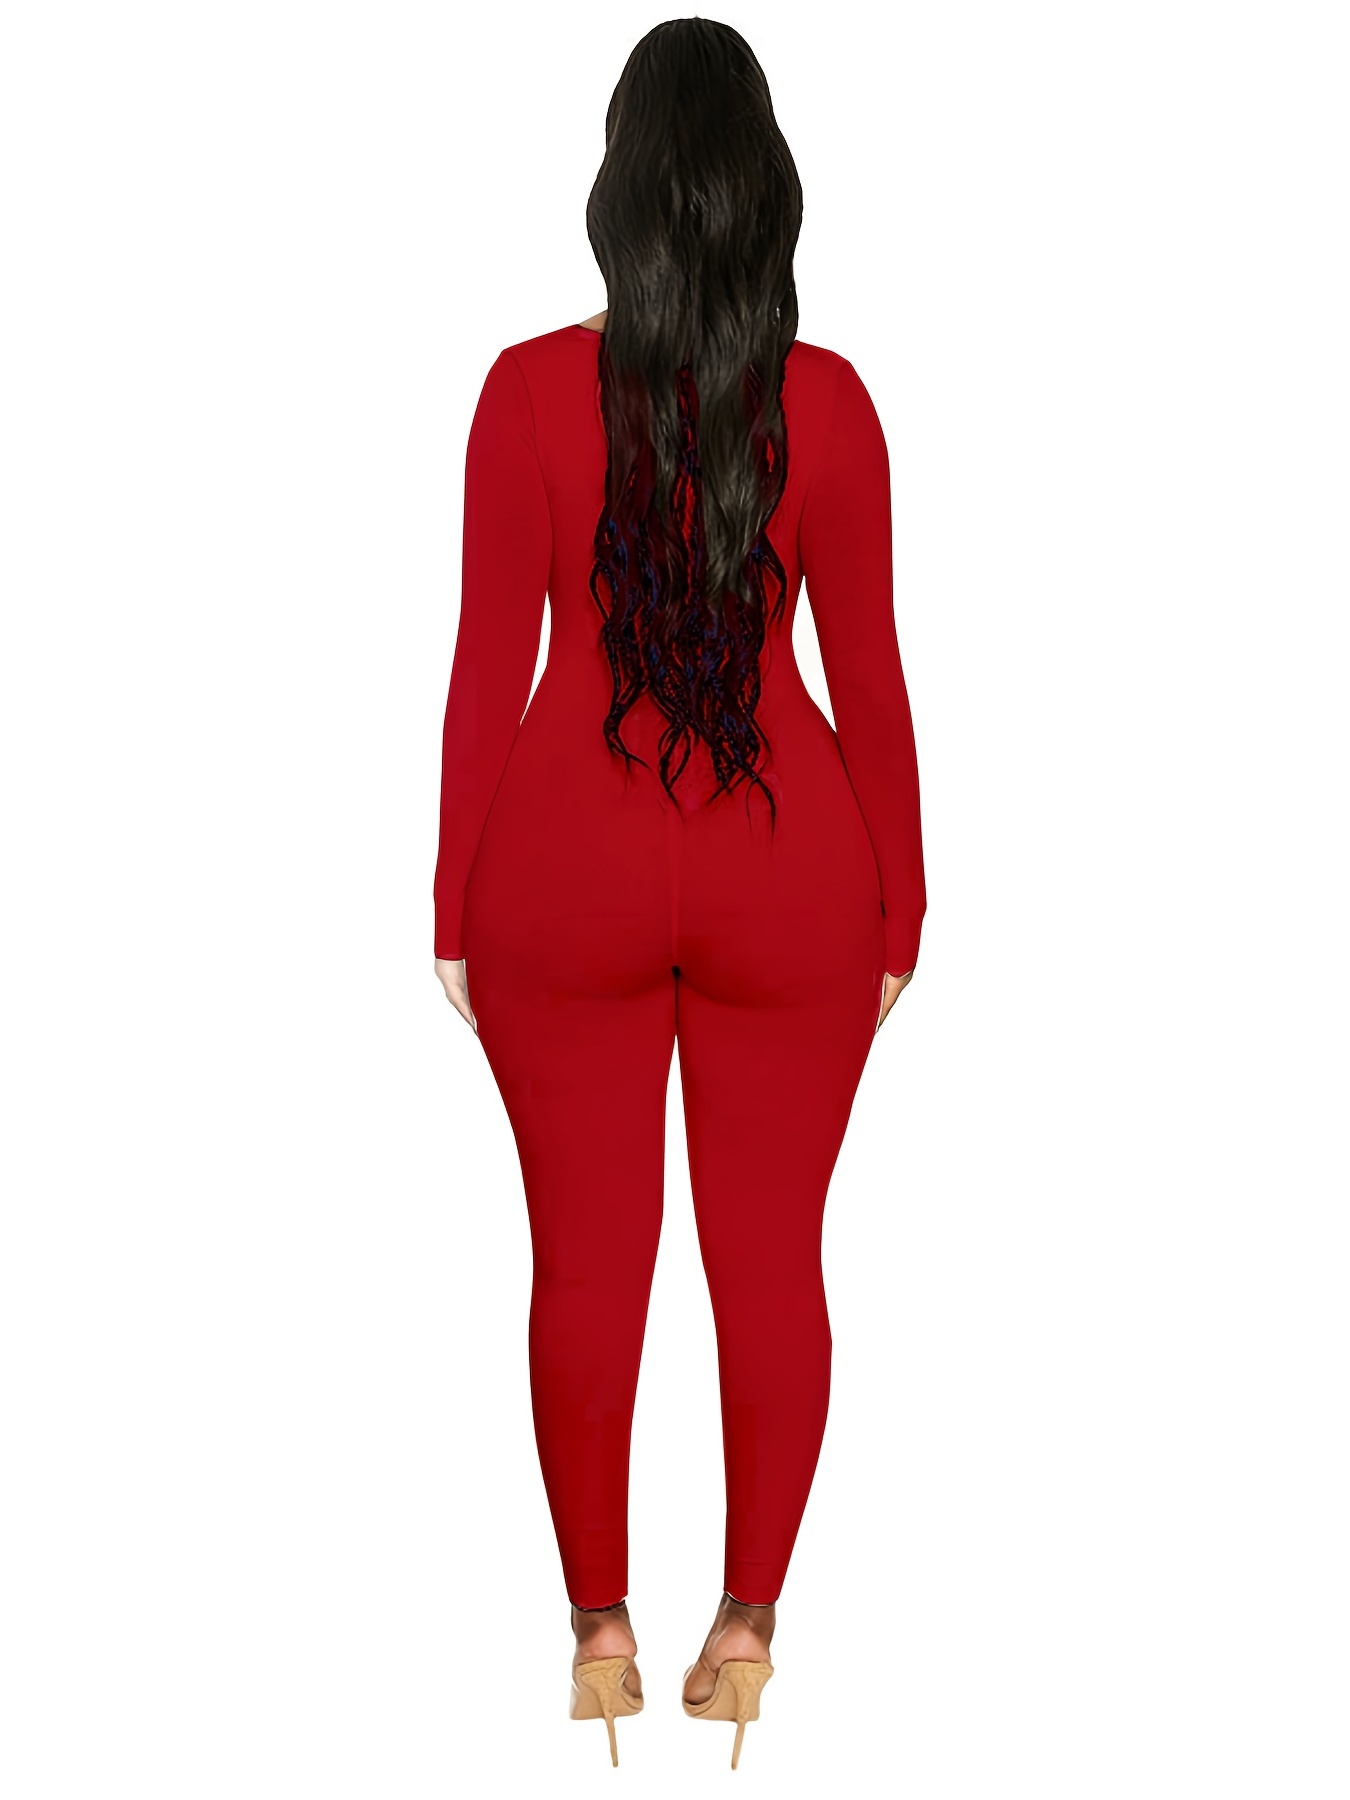 Colombian Womens Bodycon Fitted Jumpsuit With Tummy Control And Long  Sleeves From Cinda02, $16.37